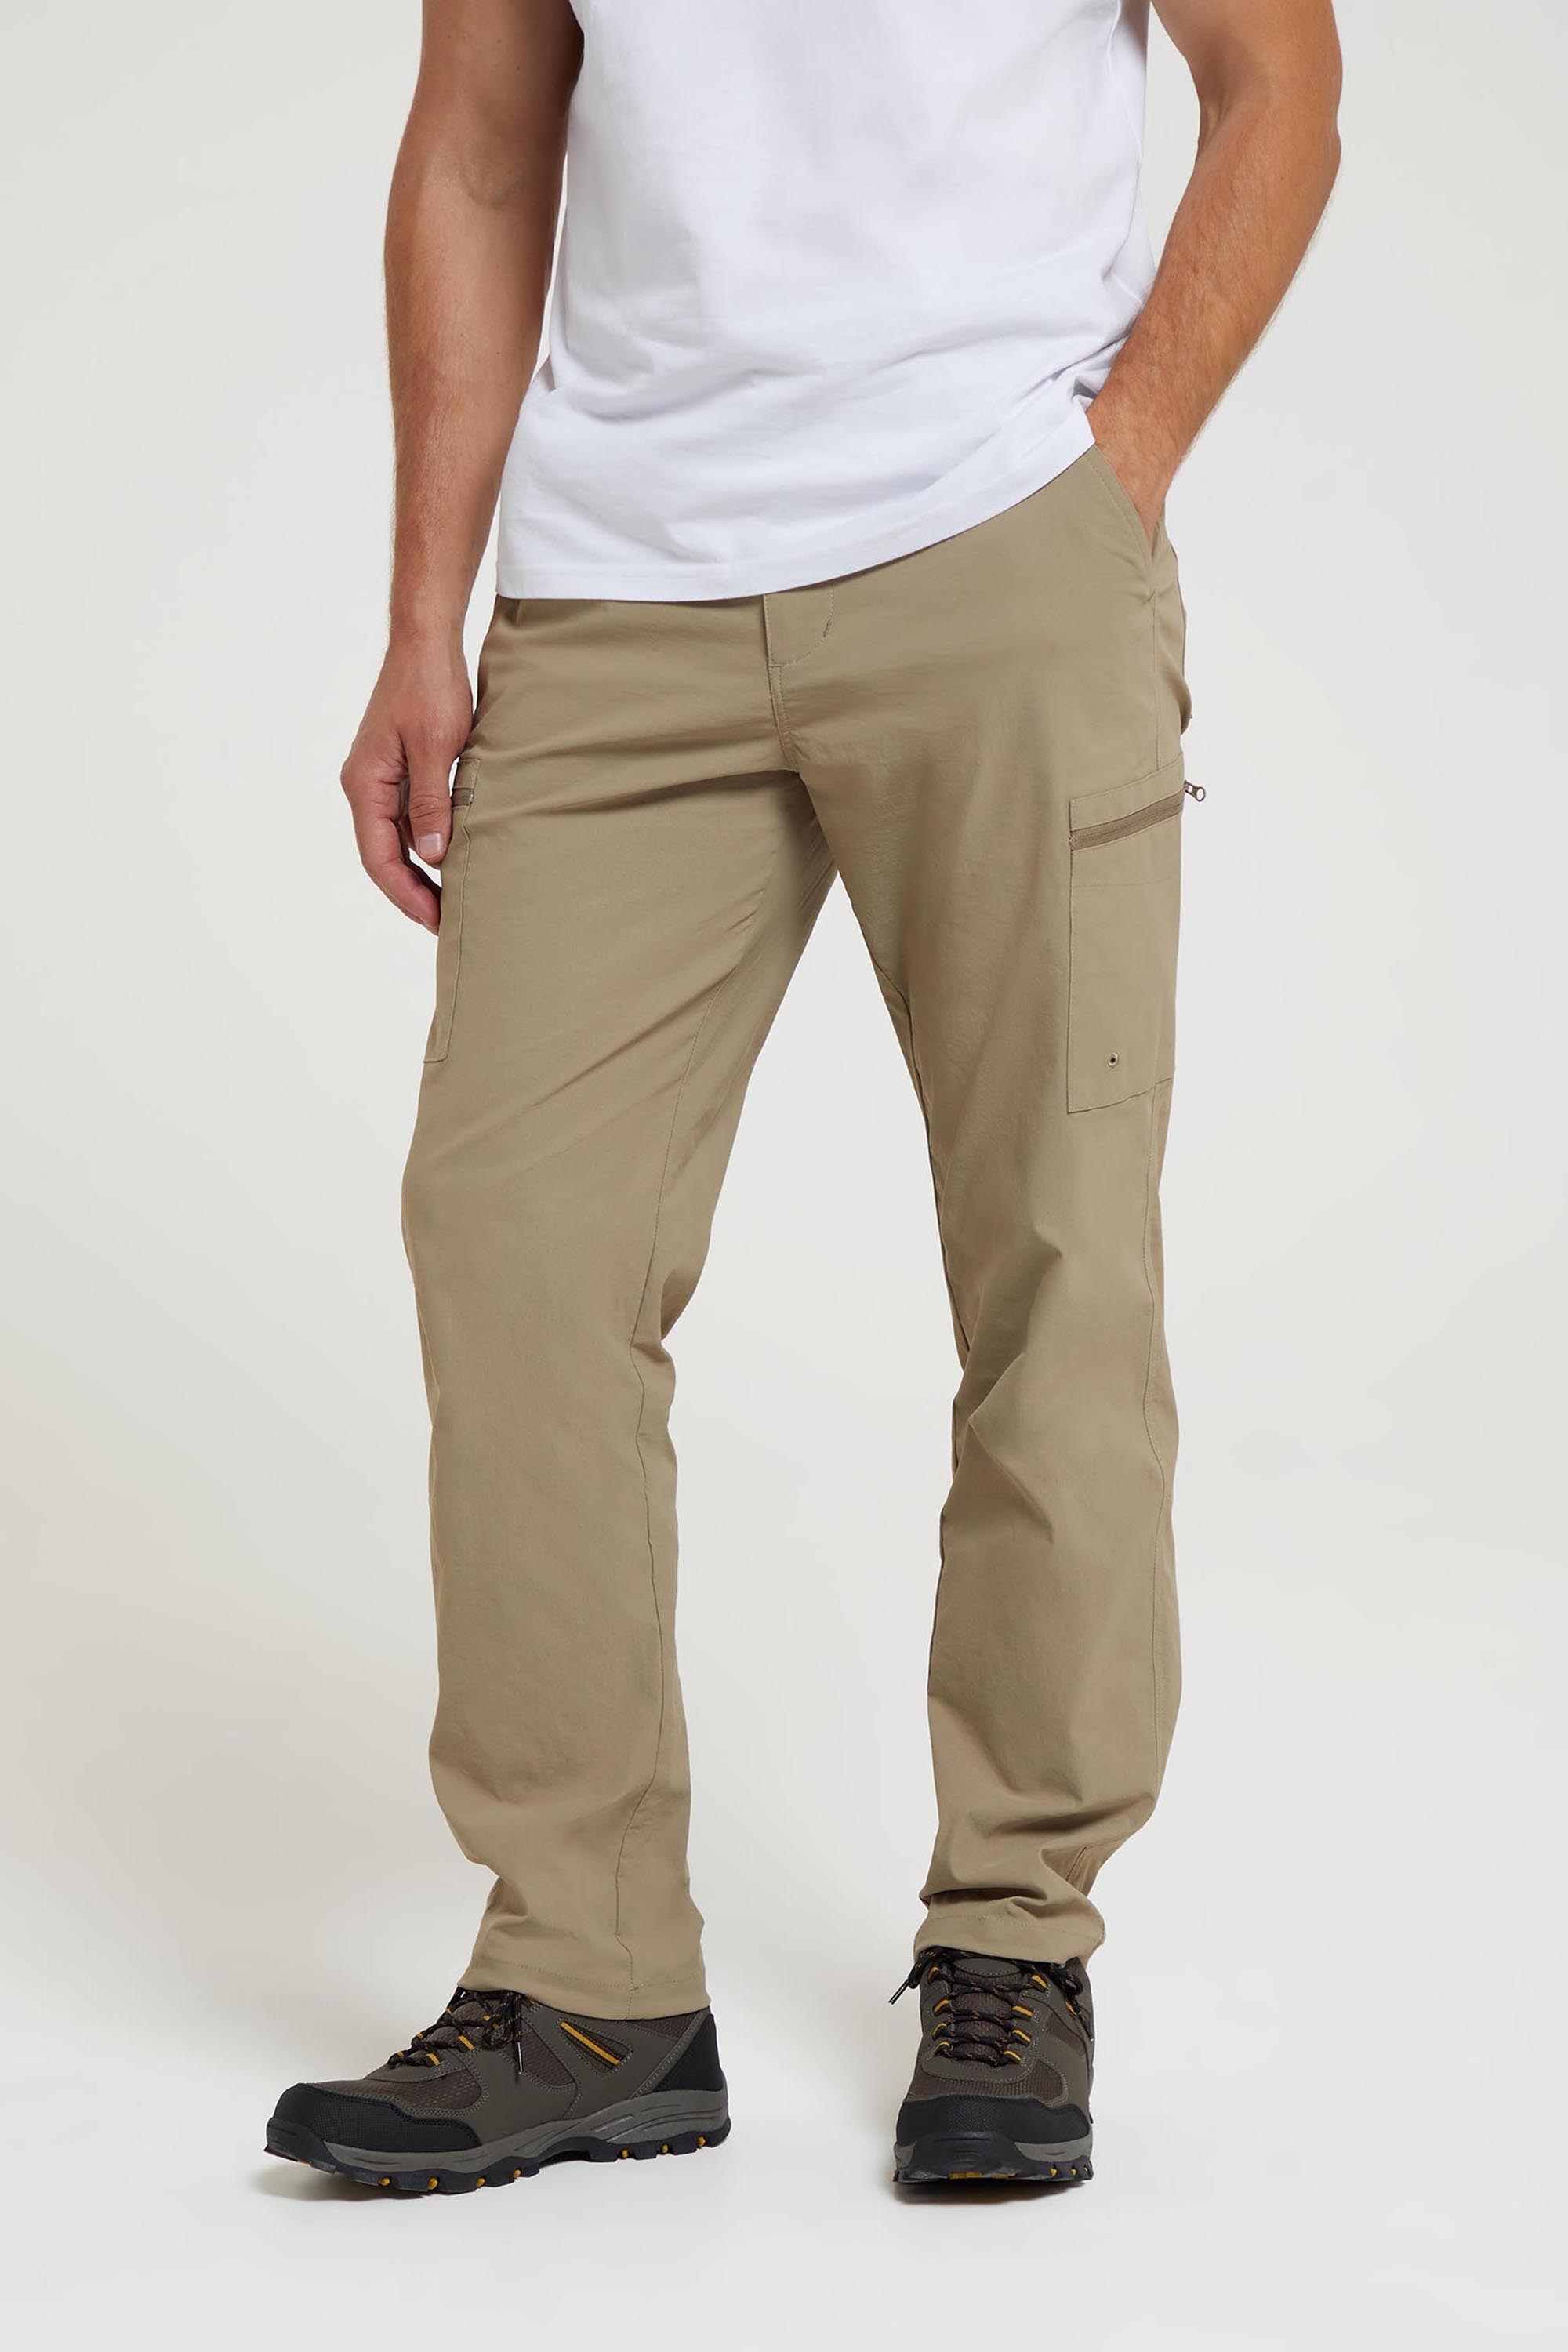 QWANG Men's Casual Loose And Comfortable Casual Pants Cotton Linen Buttons  Trousers - Walmart.com